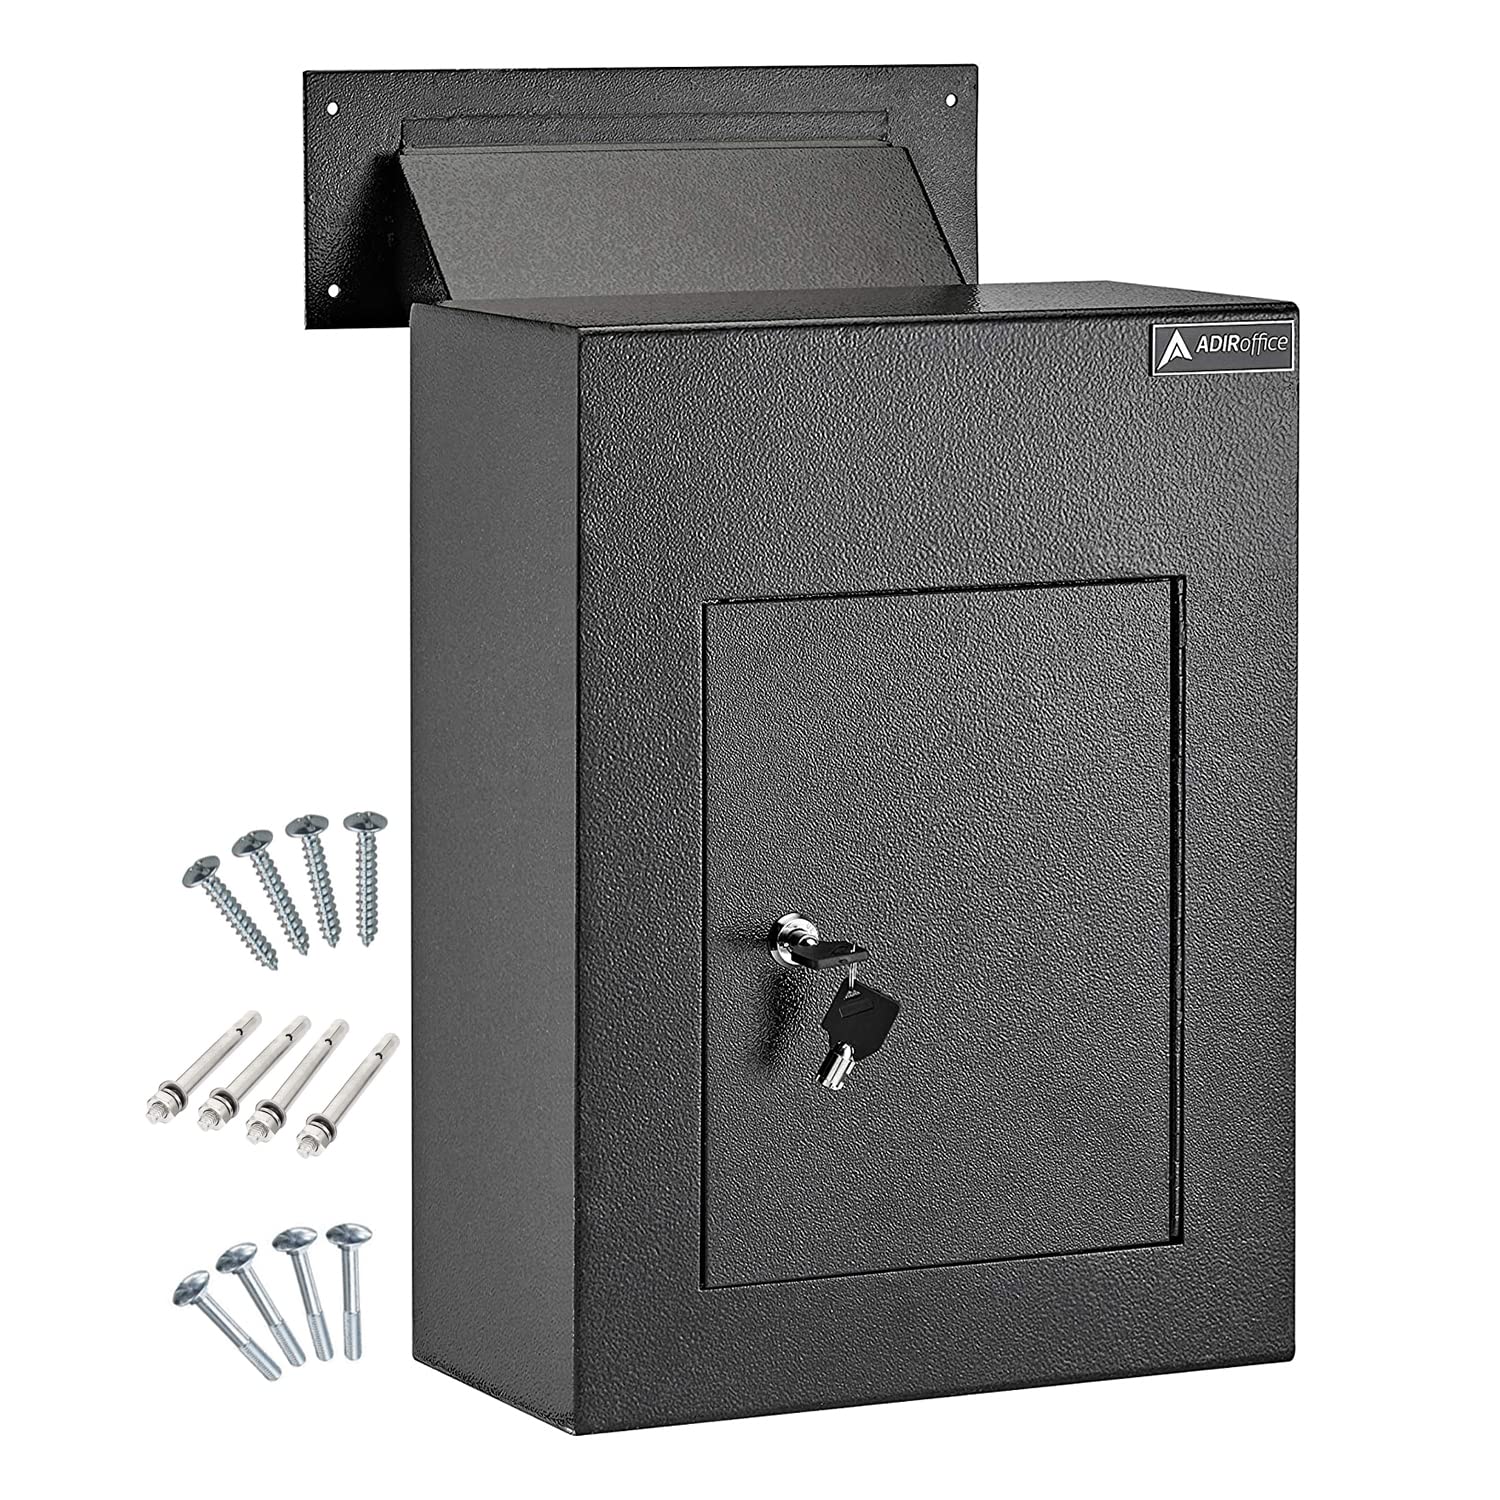 AdirOffice Through The Wall Drop Box Safe - Durable Thick Steel w/Adjustable Chute - Mail Vault for Home Office Hotel Apartment  - Very Good